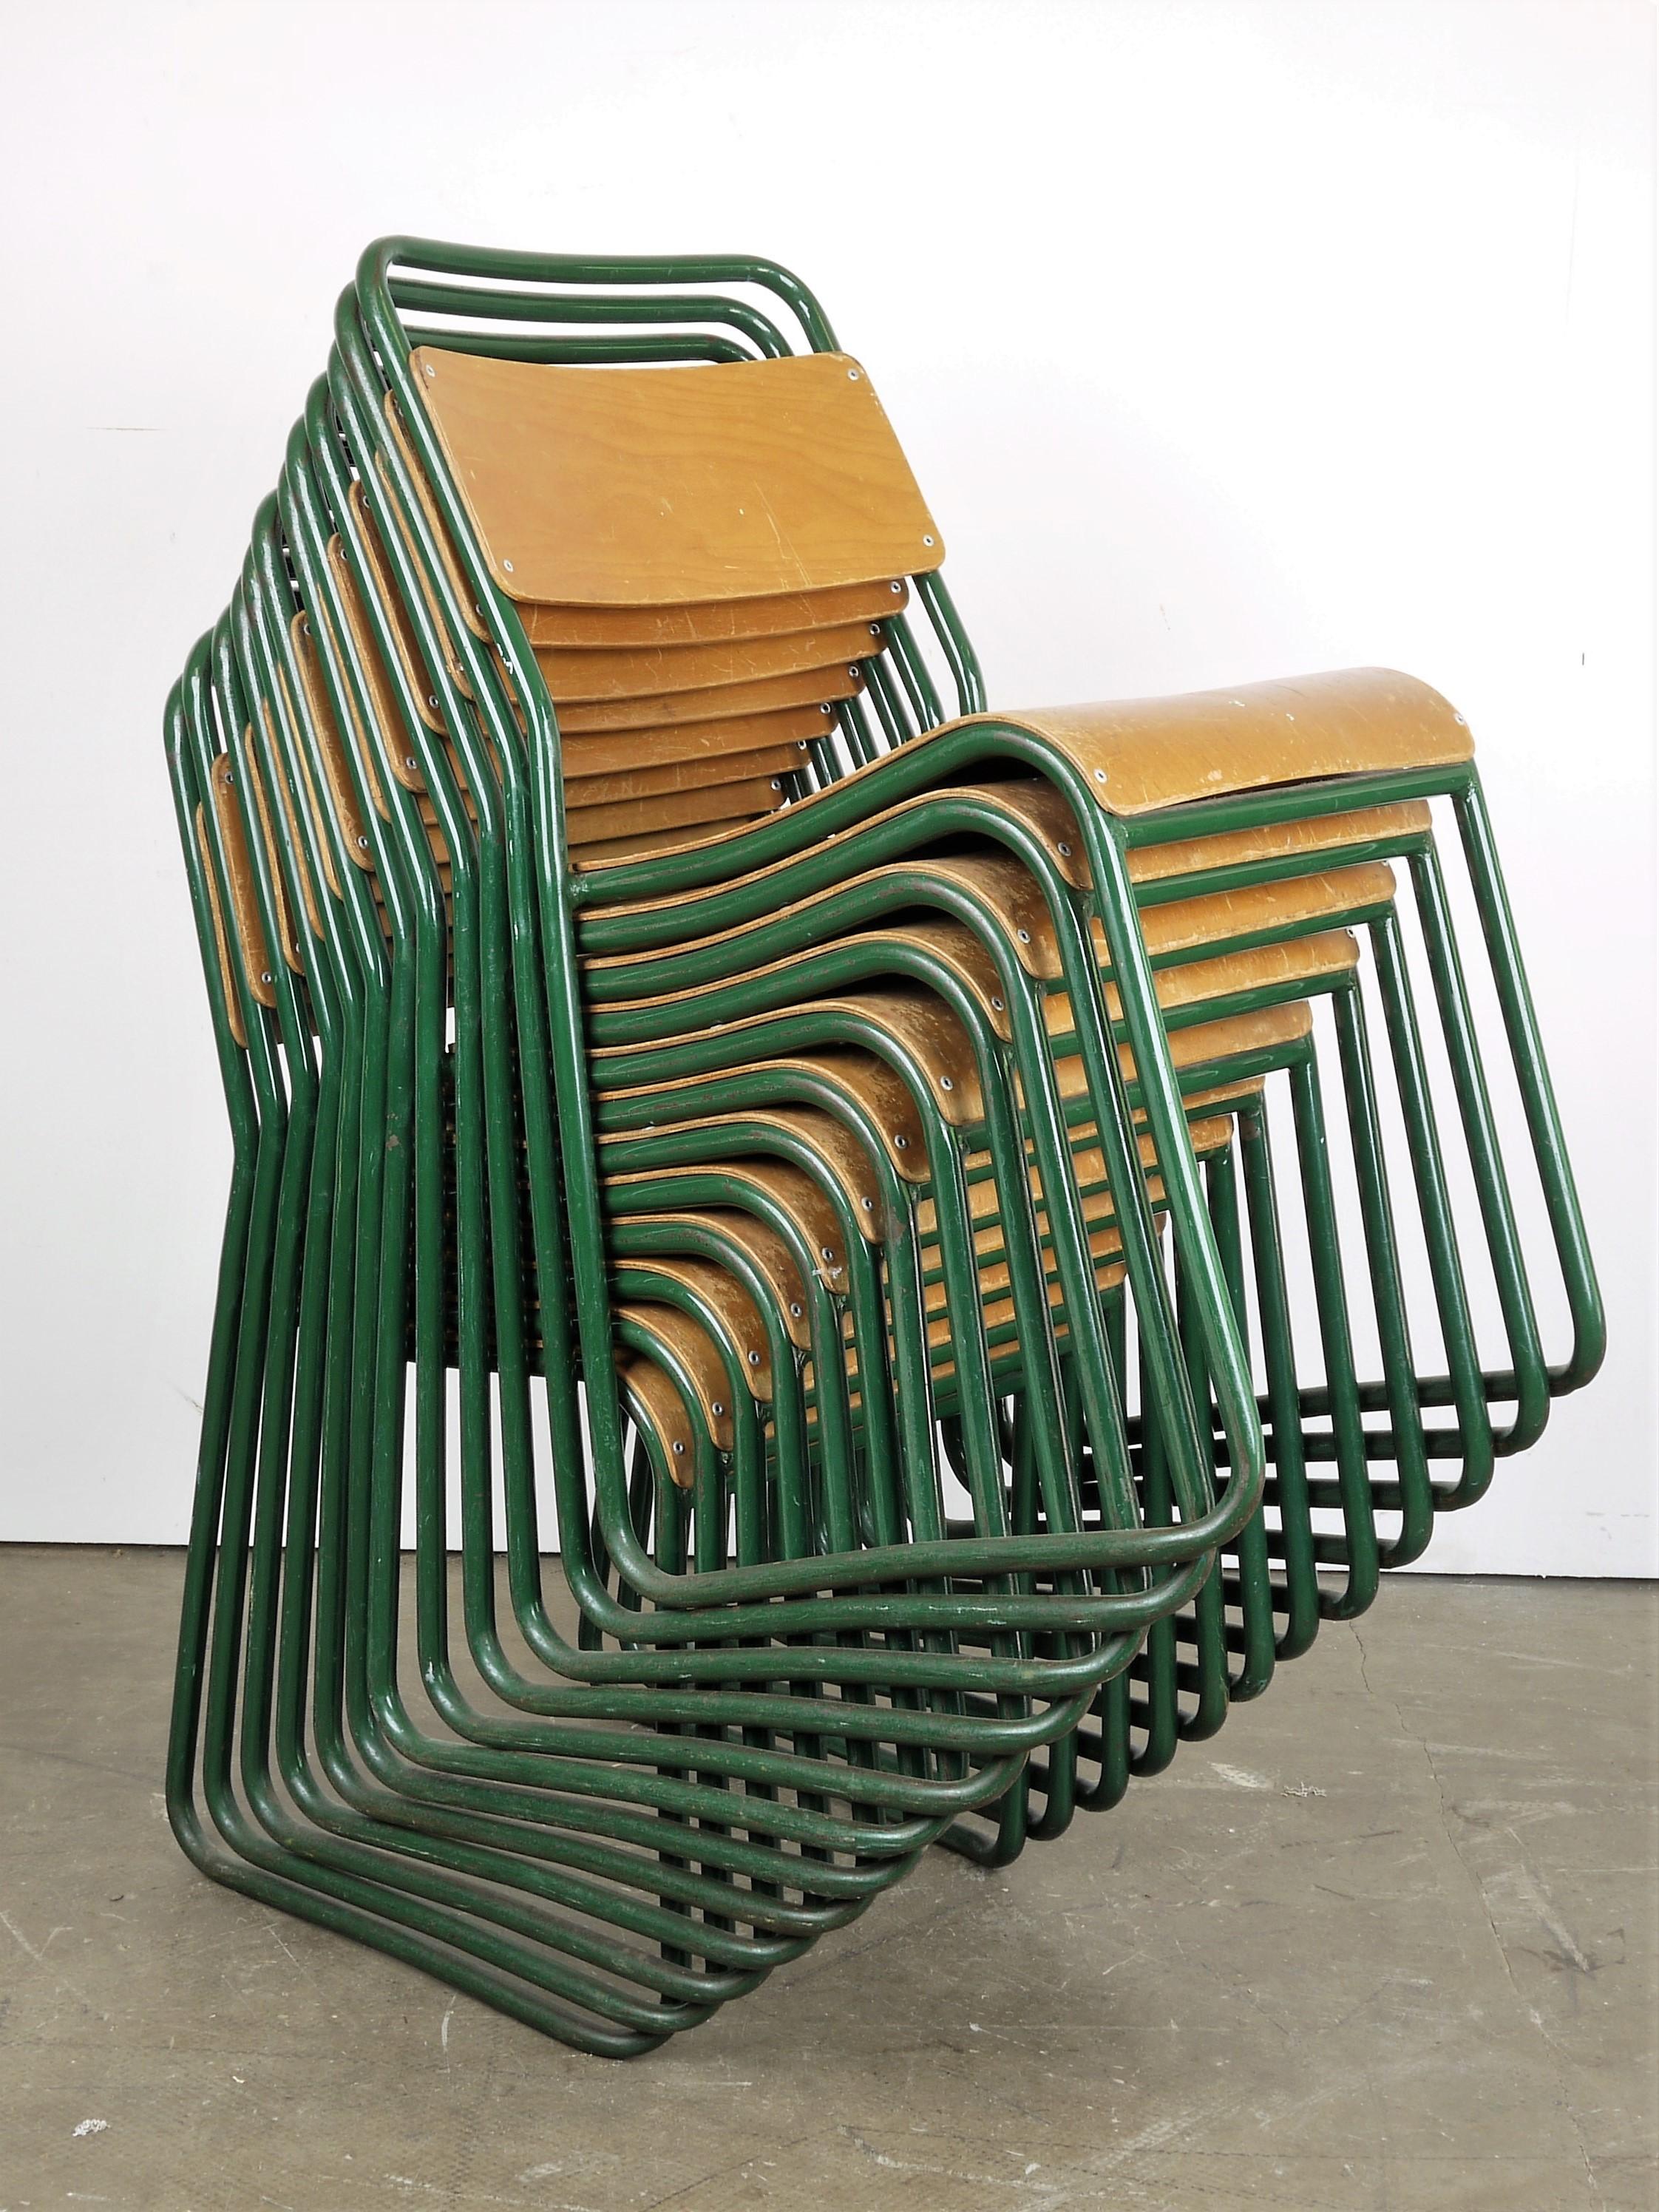 1940s Cox green stacking tubular metal dining chair - good quantities available
1940s Cox green stacking tubular metal dining chair - set of eight. Cox chairs are a British essential and this batch was an incredible find in exceptional original